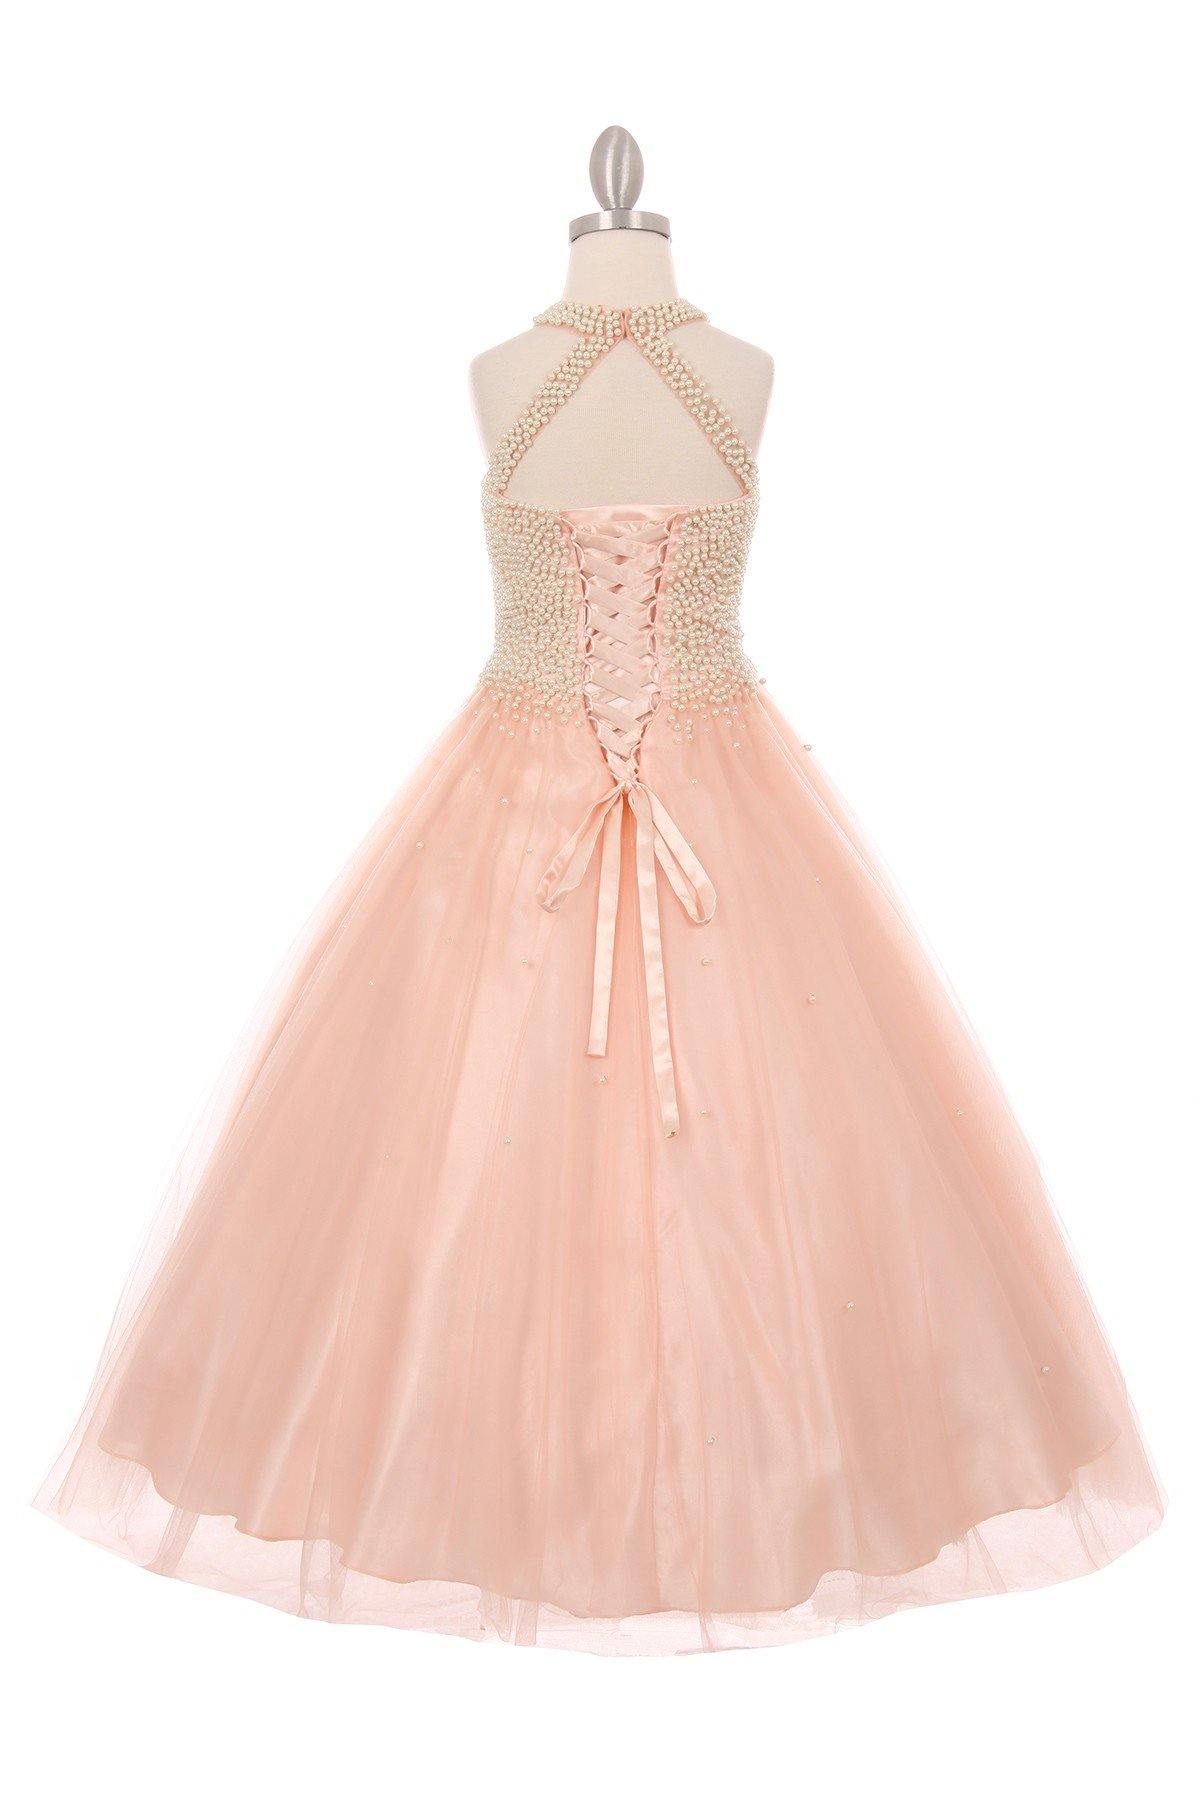 Pearl Halter Style Long Gown Flower Girl Dress - The Dress Outlet Cinderella Couture